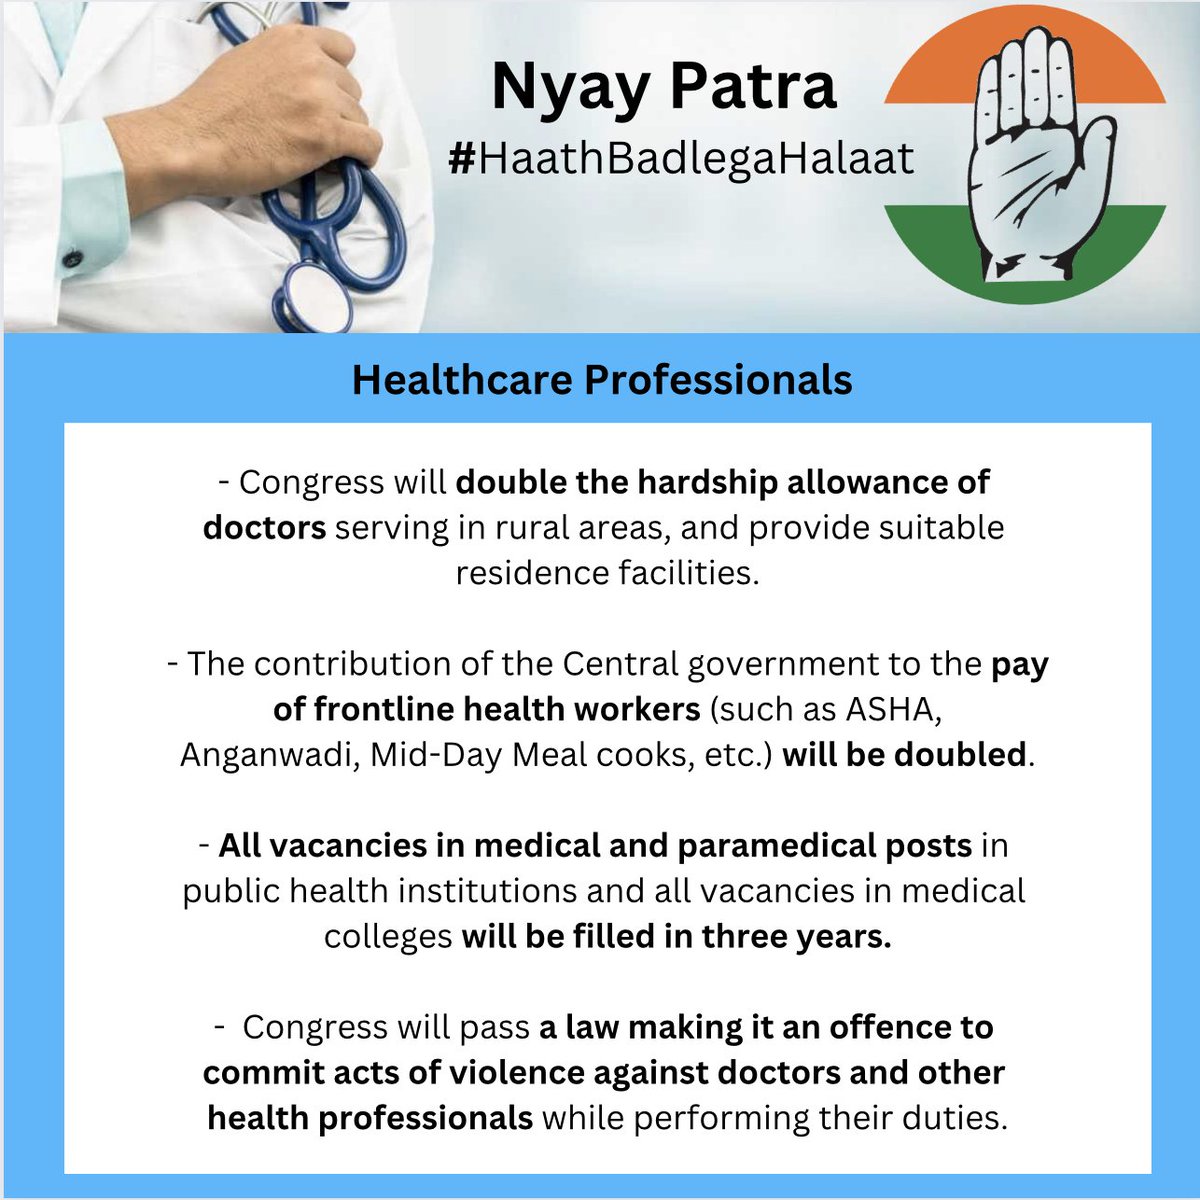 #CongressNyayPatra
Healthcare Professionals: What is in it for you?

Standing with our healthcare heroes, Congress pledges double support: doubling hardship allowances for rural doctors, doubling central contributions for frontline workers, filling medical vacancies, and ensuring